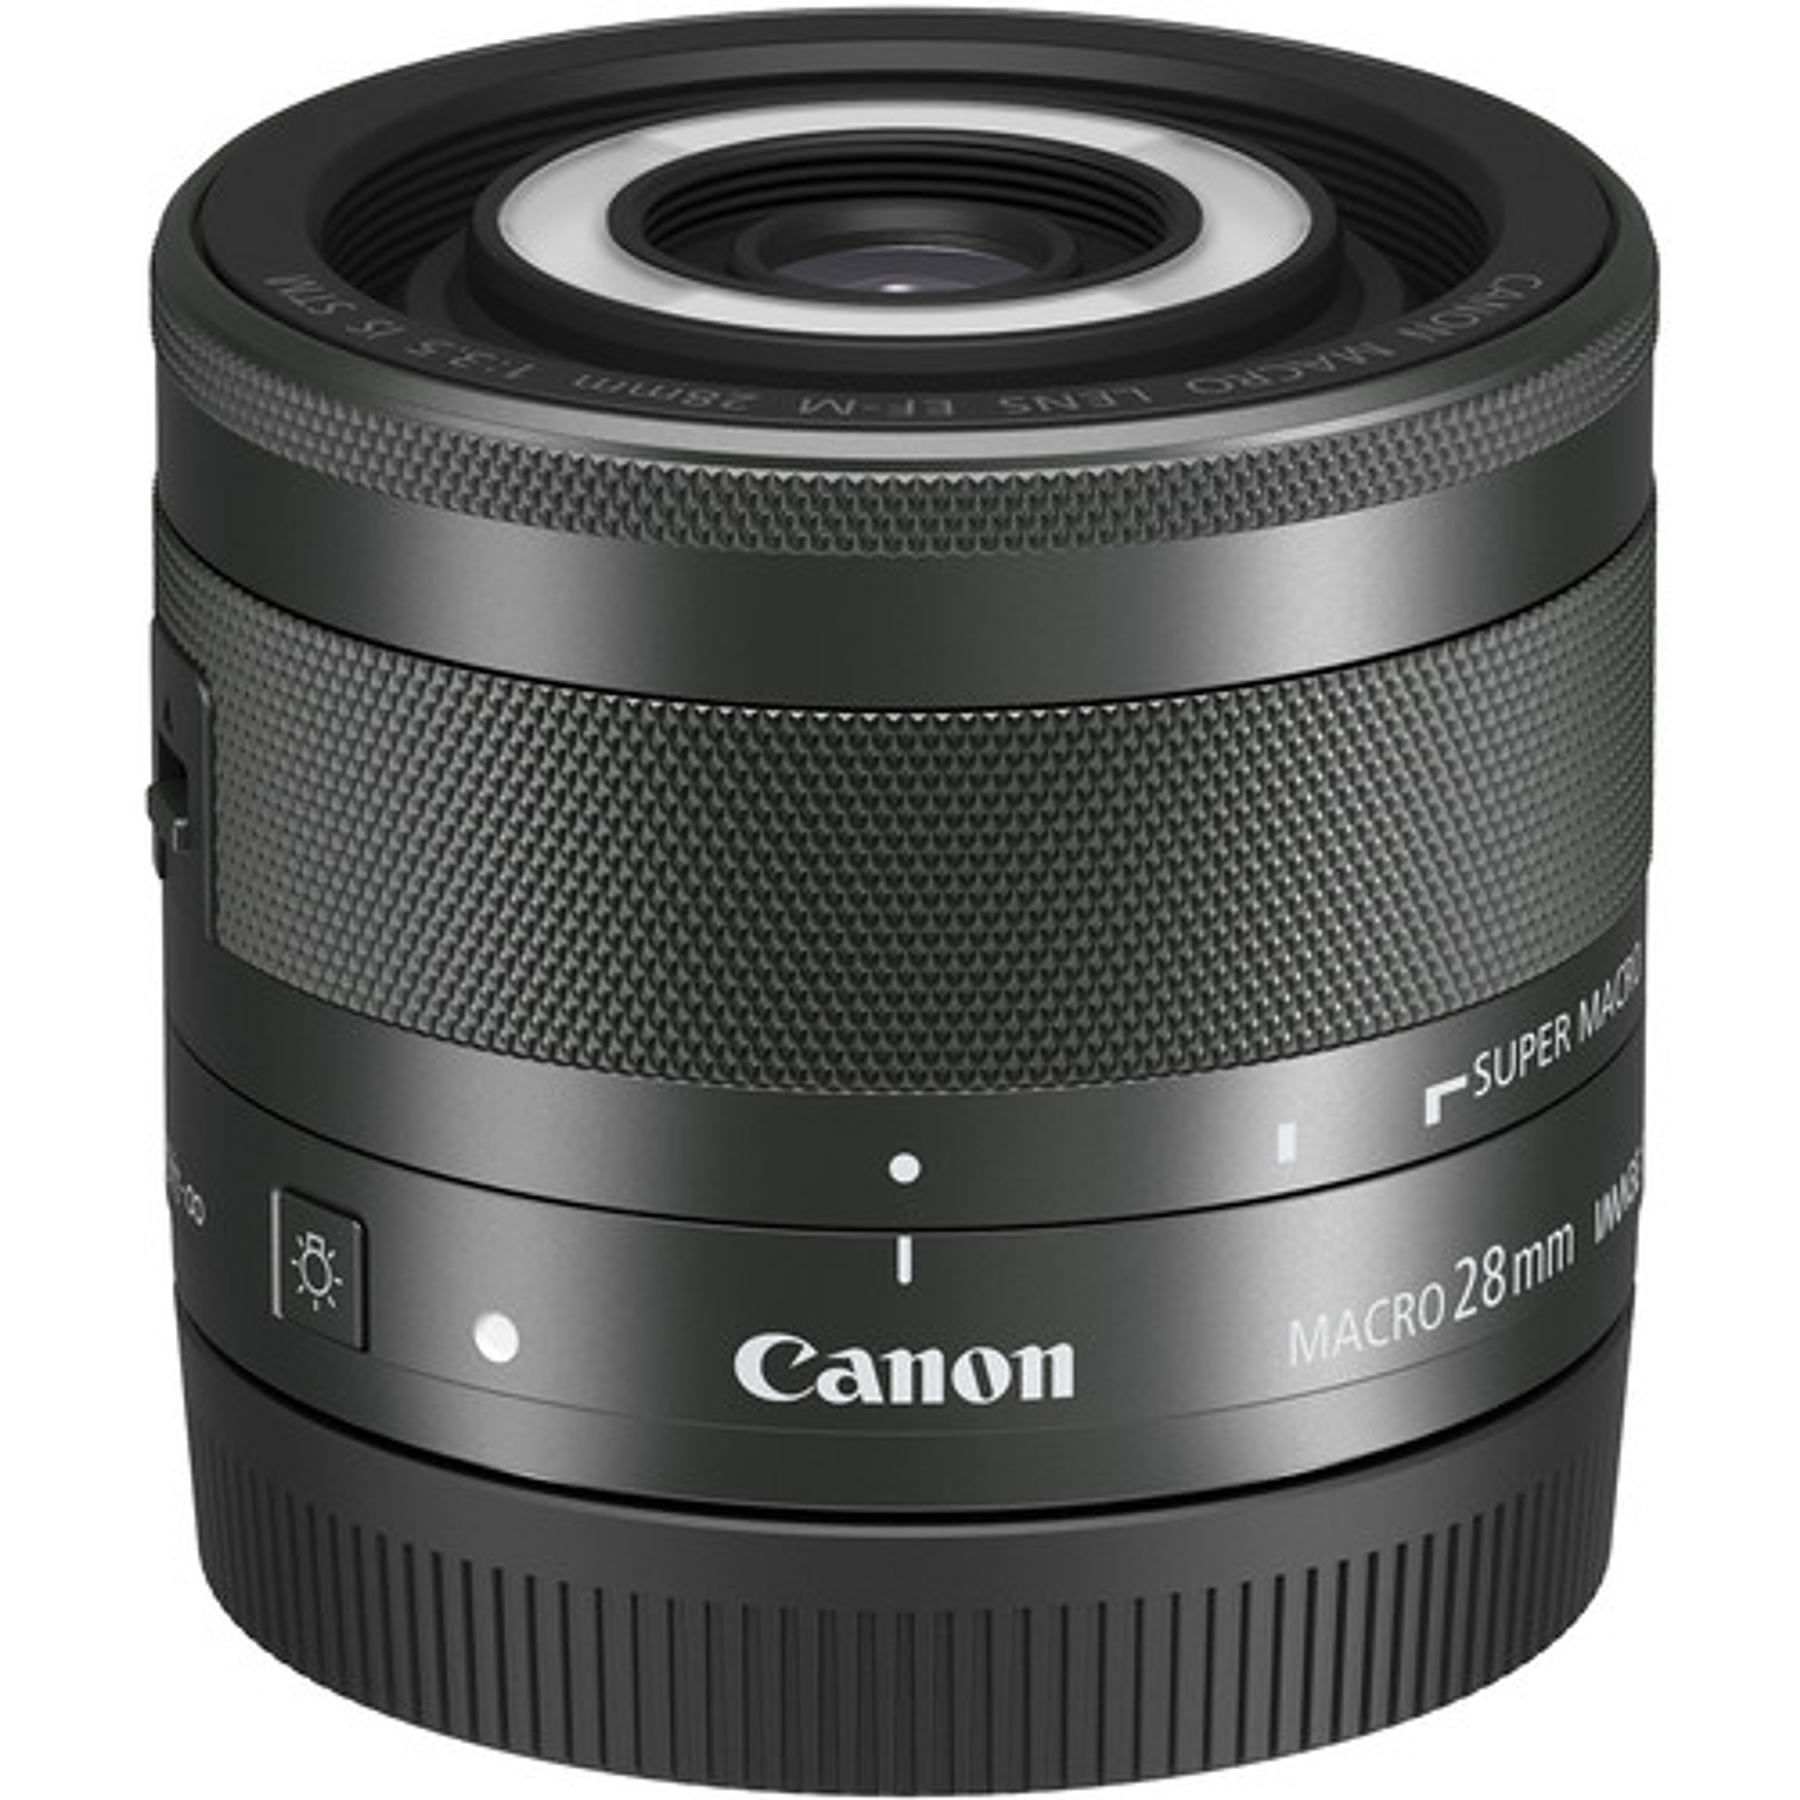 Canon EF-M 28 mm f/3.5 Macro IS STM